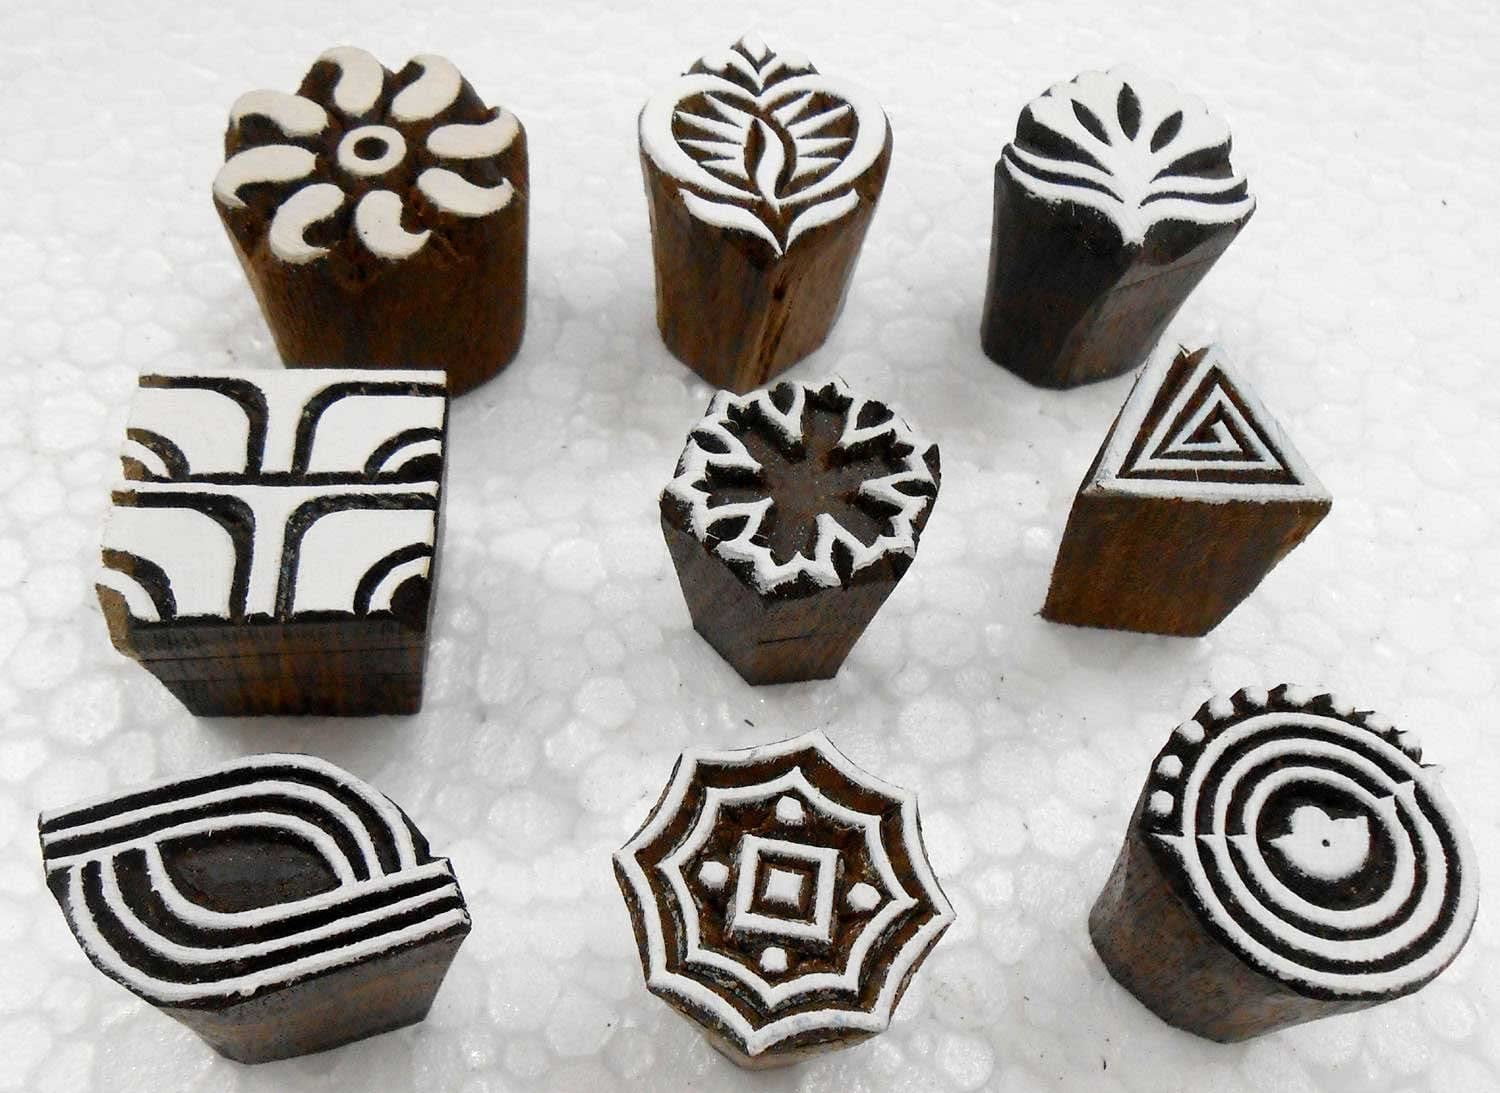 Wholesale Lot of 9 Wooden Block Stamps for Textile Printing/Scrapbooking/Henna Tattoo 